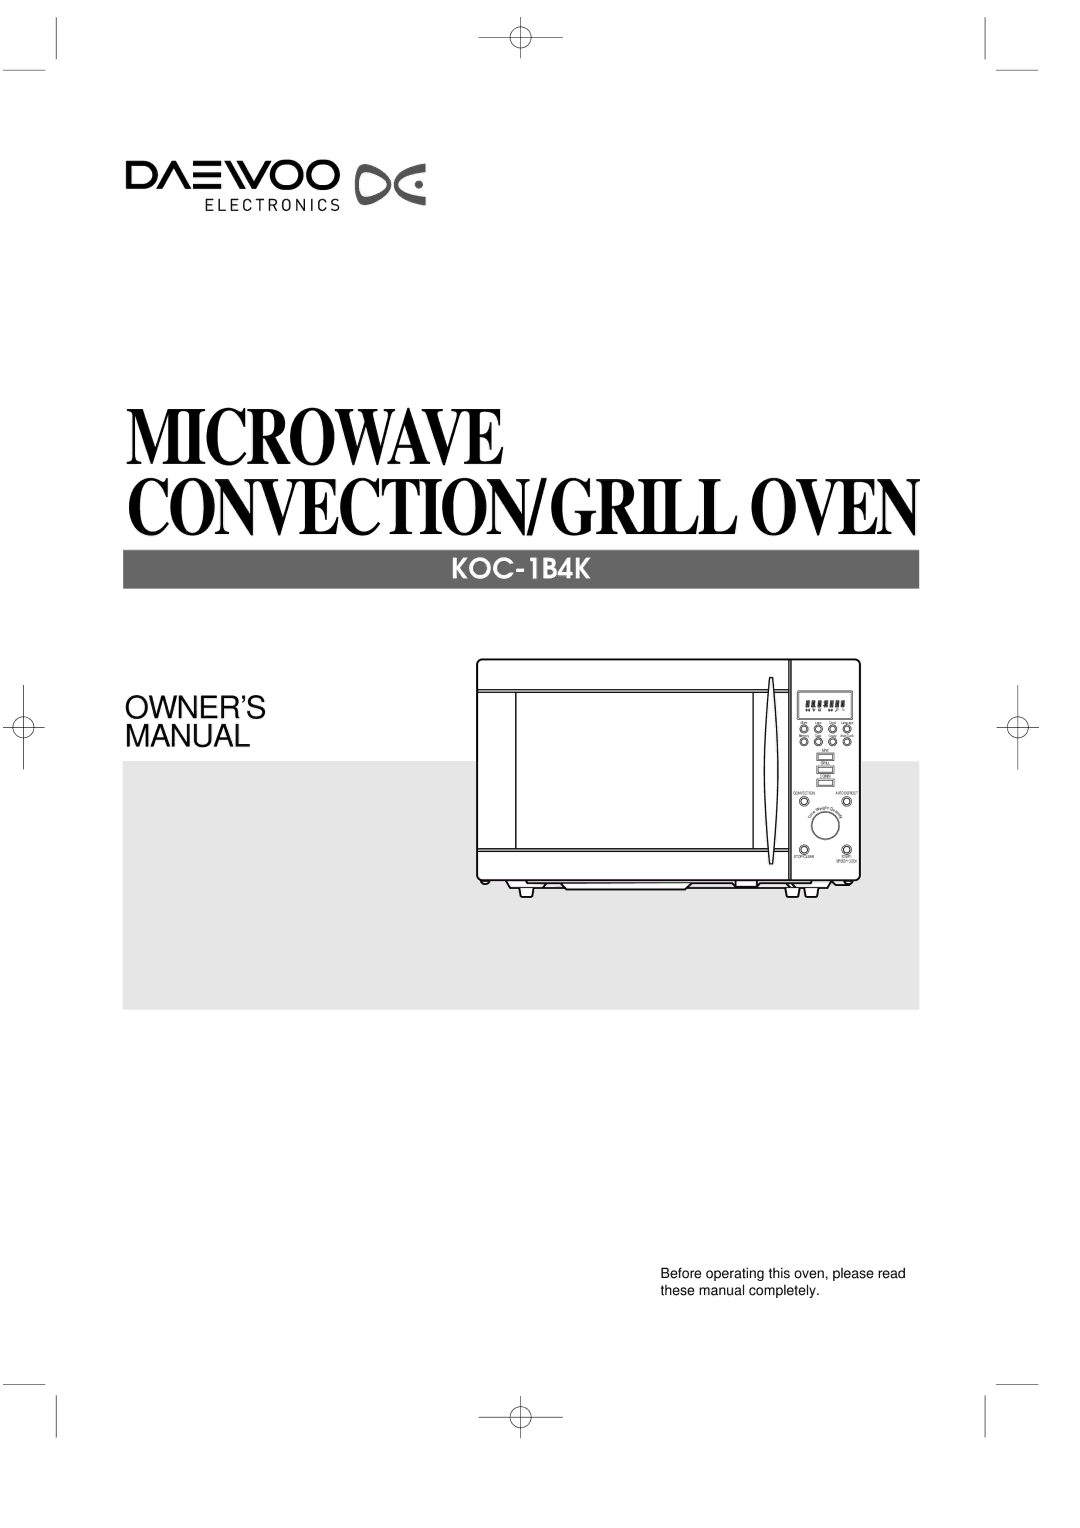 Daewoo KOC-1B4K owner manual Microwave CONVECTION/GRILL Oven 